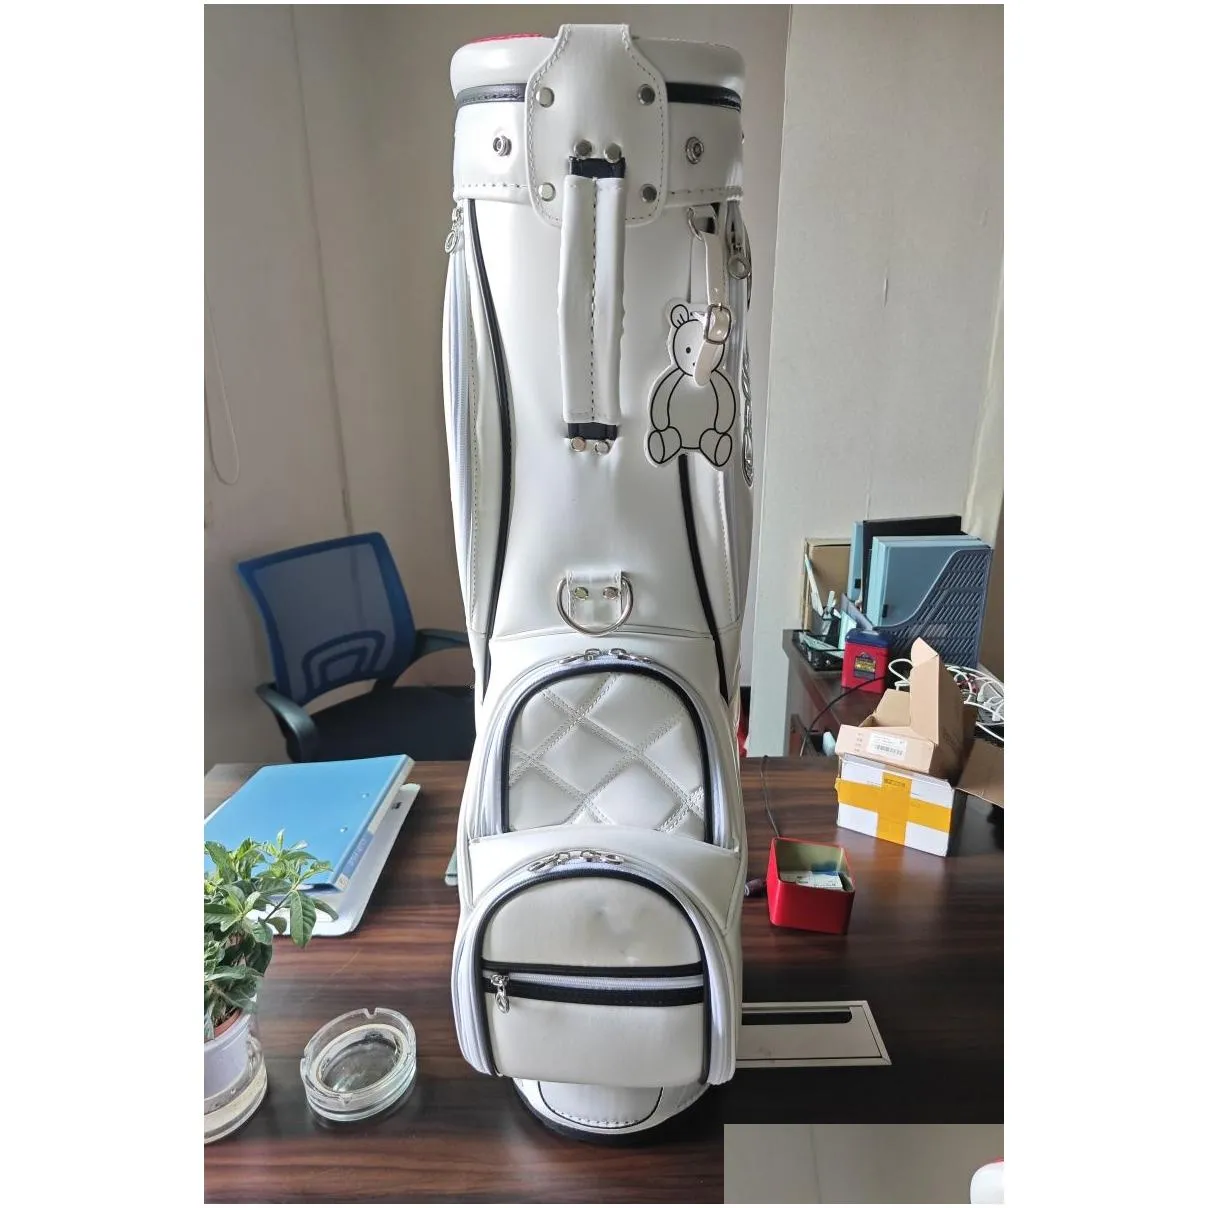 golf bags white cart bags unisex pu makes waterproof lightweight bags contact us to view pictures with logo